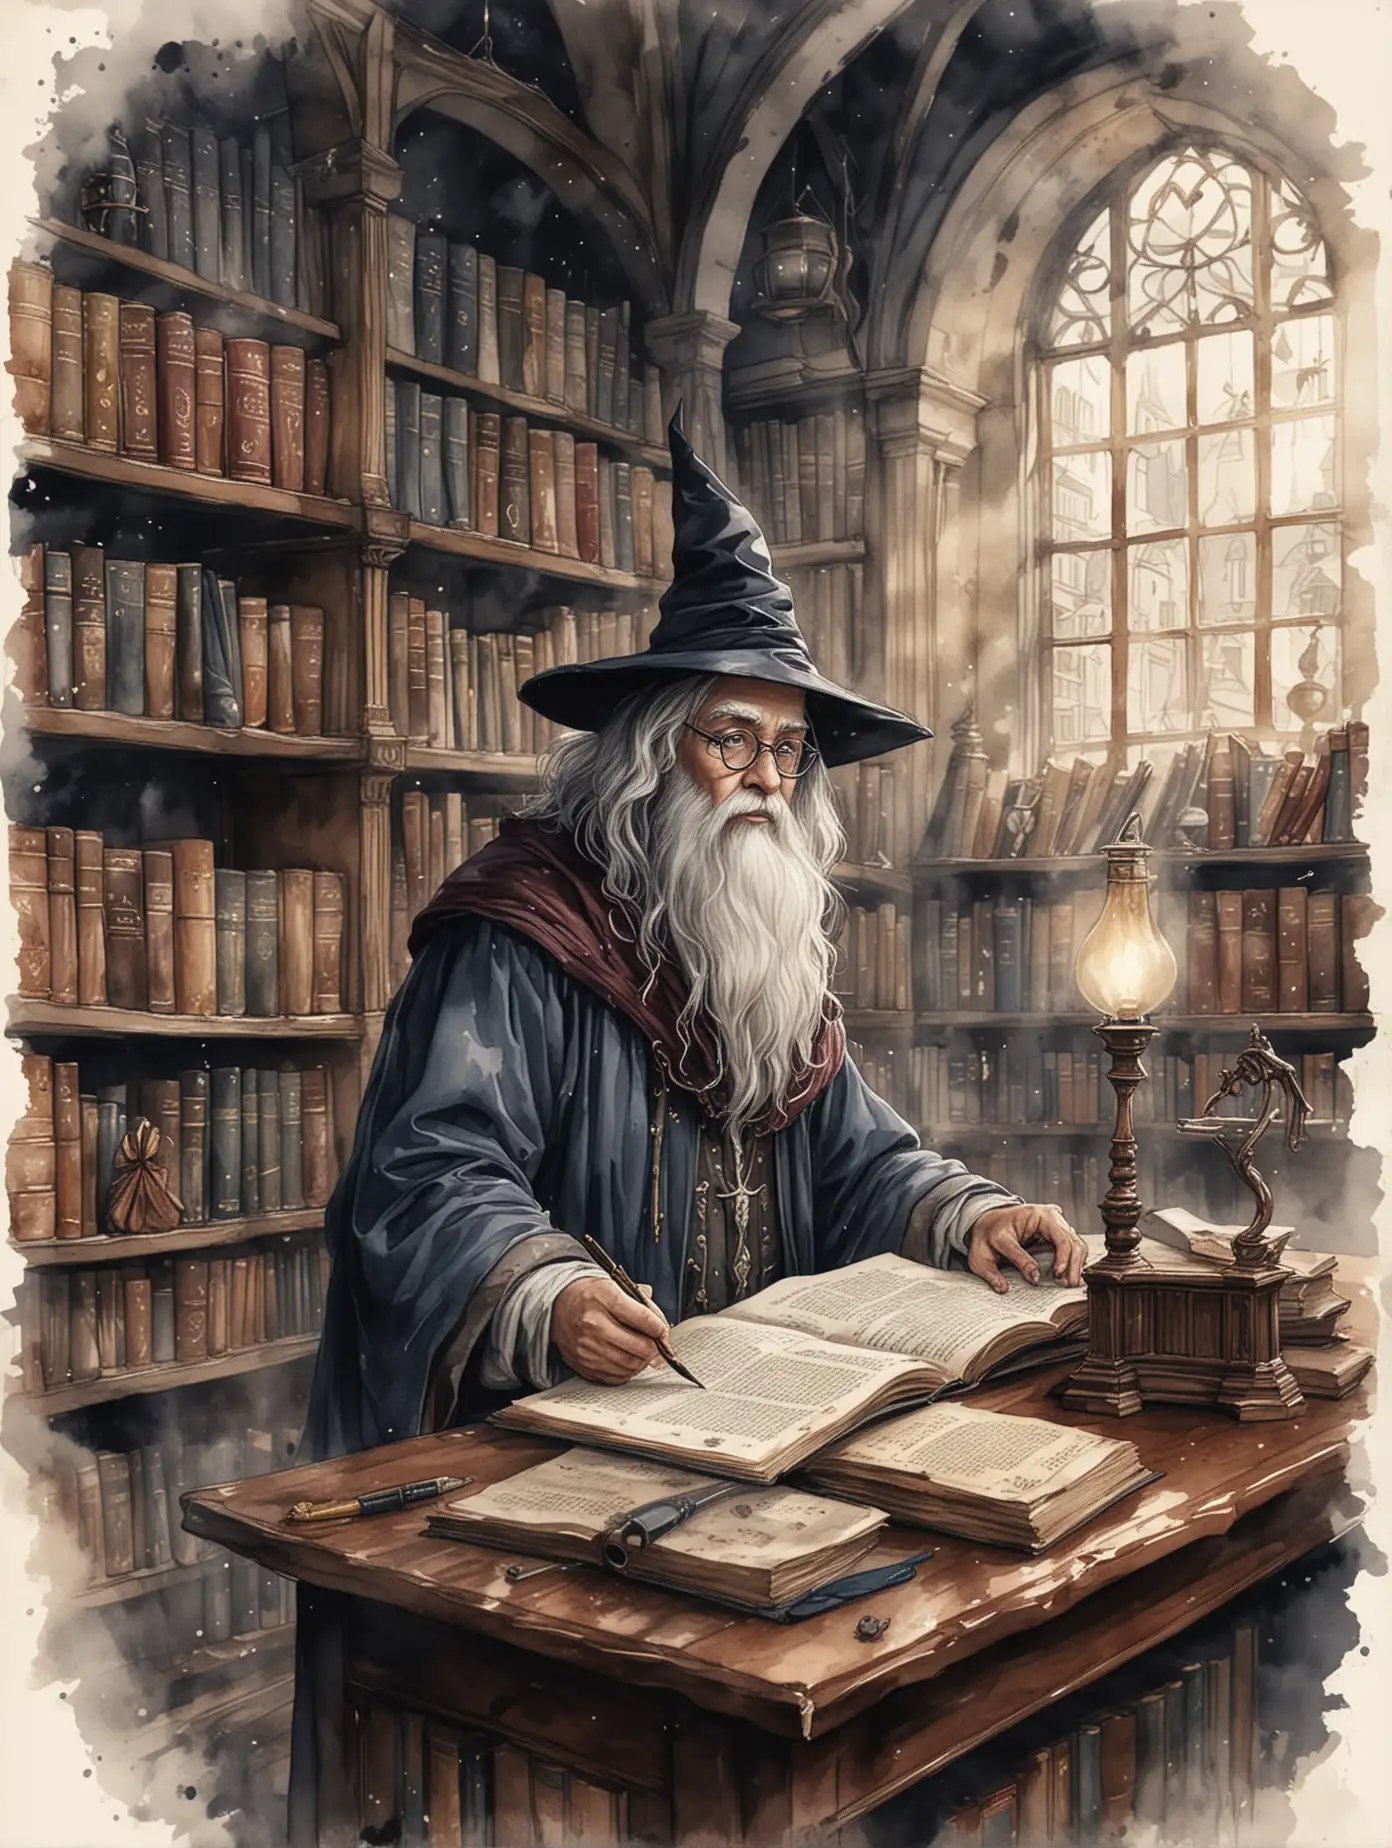 Digital illustration, Dark academia illustrations,  students, Wizard library, 300dpi, Graphic Art, watercolour and ink wash, 